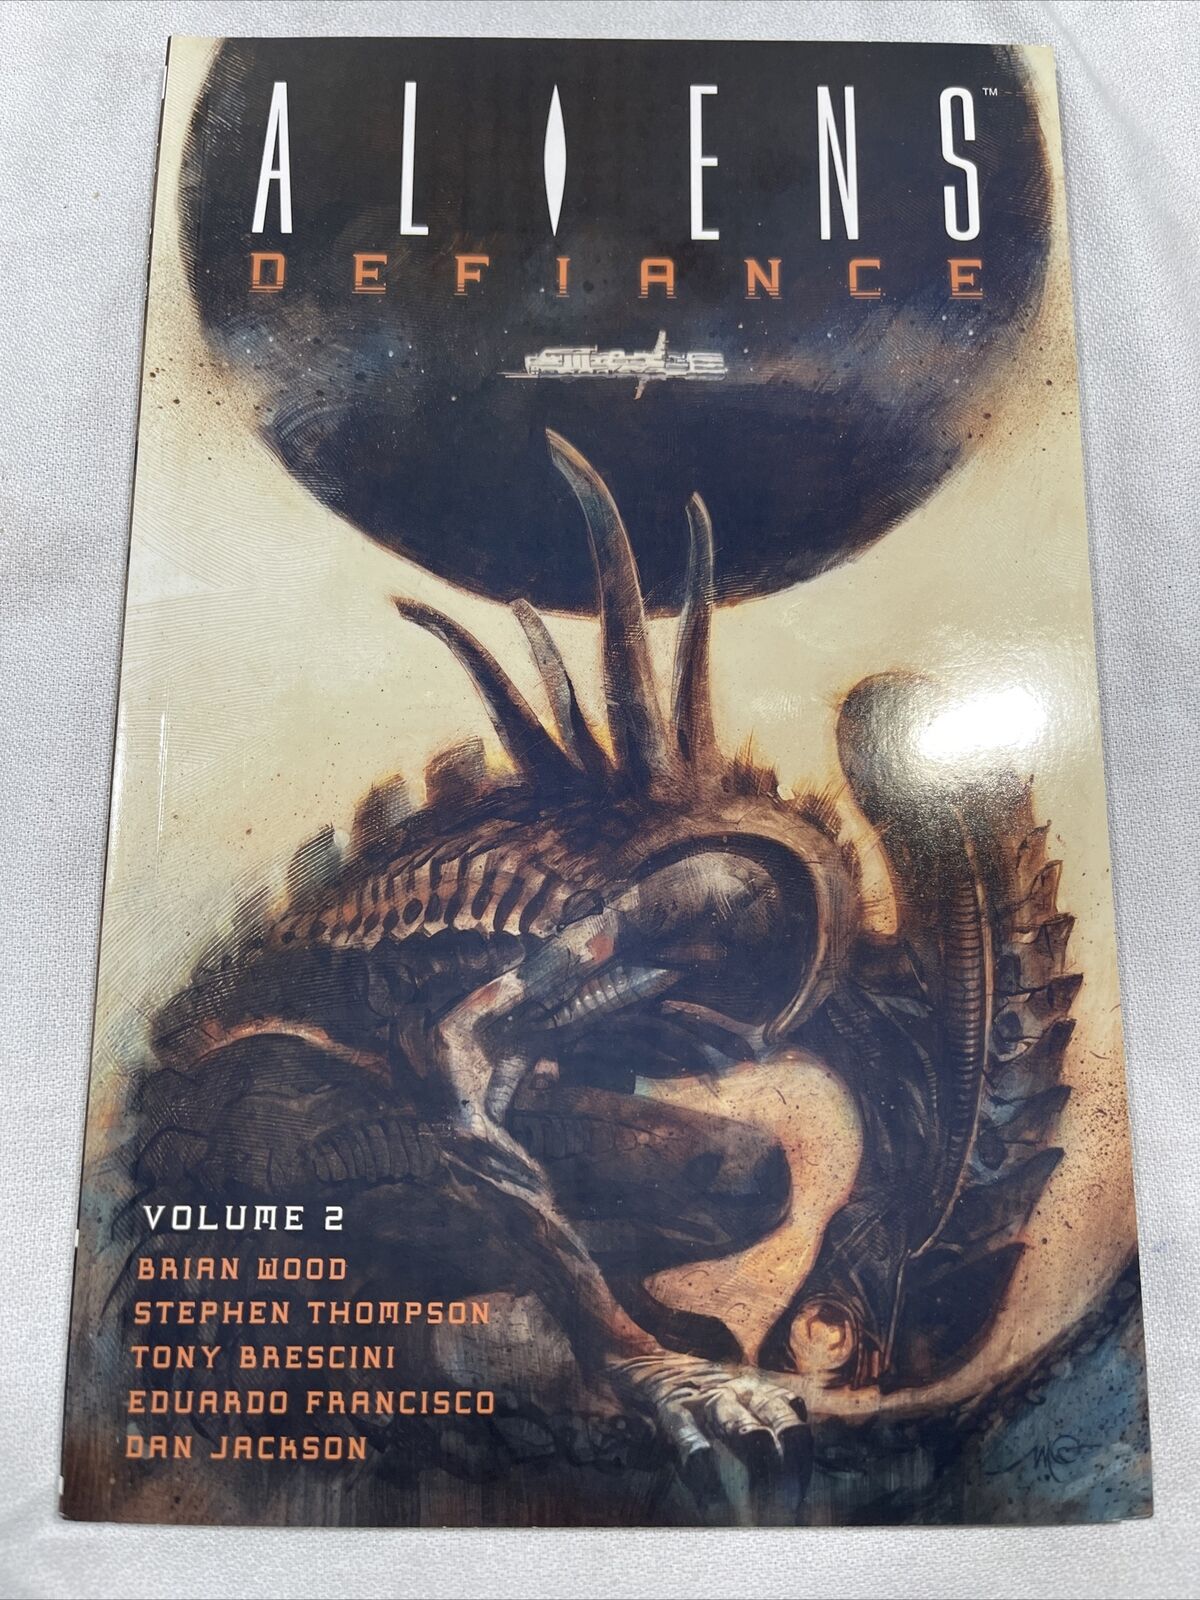 Aliens Defiance Volume 2 Trade Paperback by Brian Wood